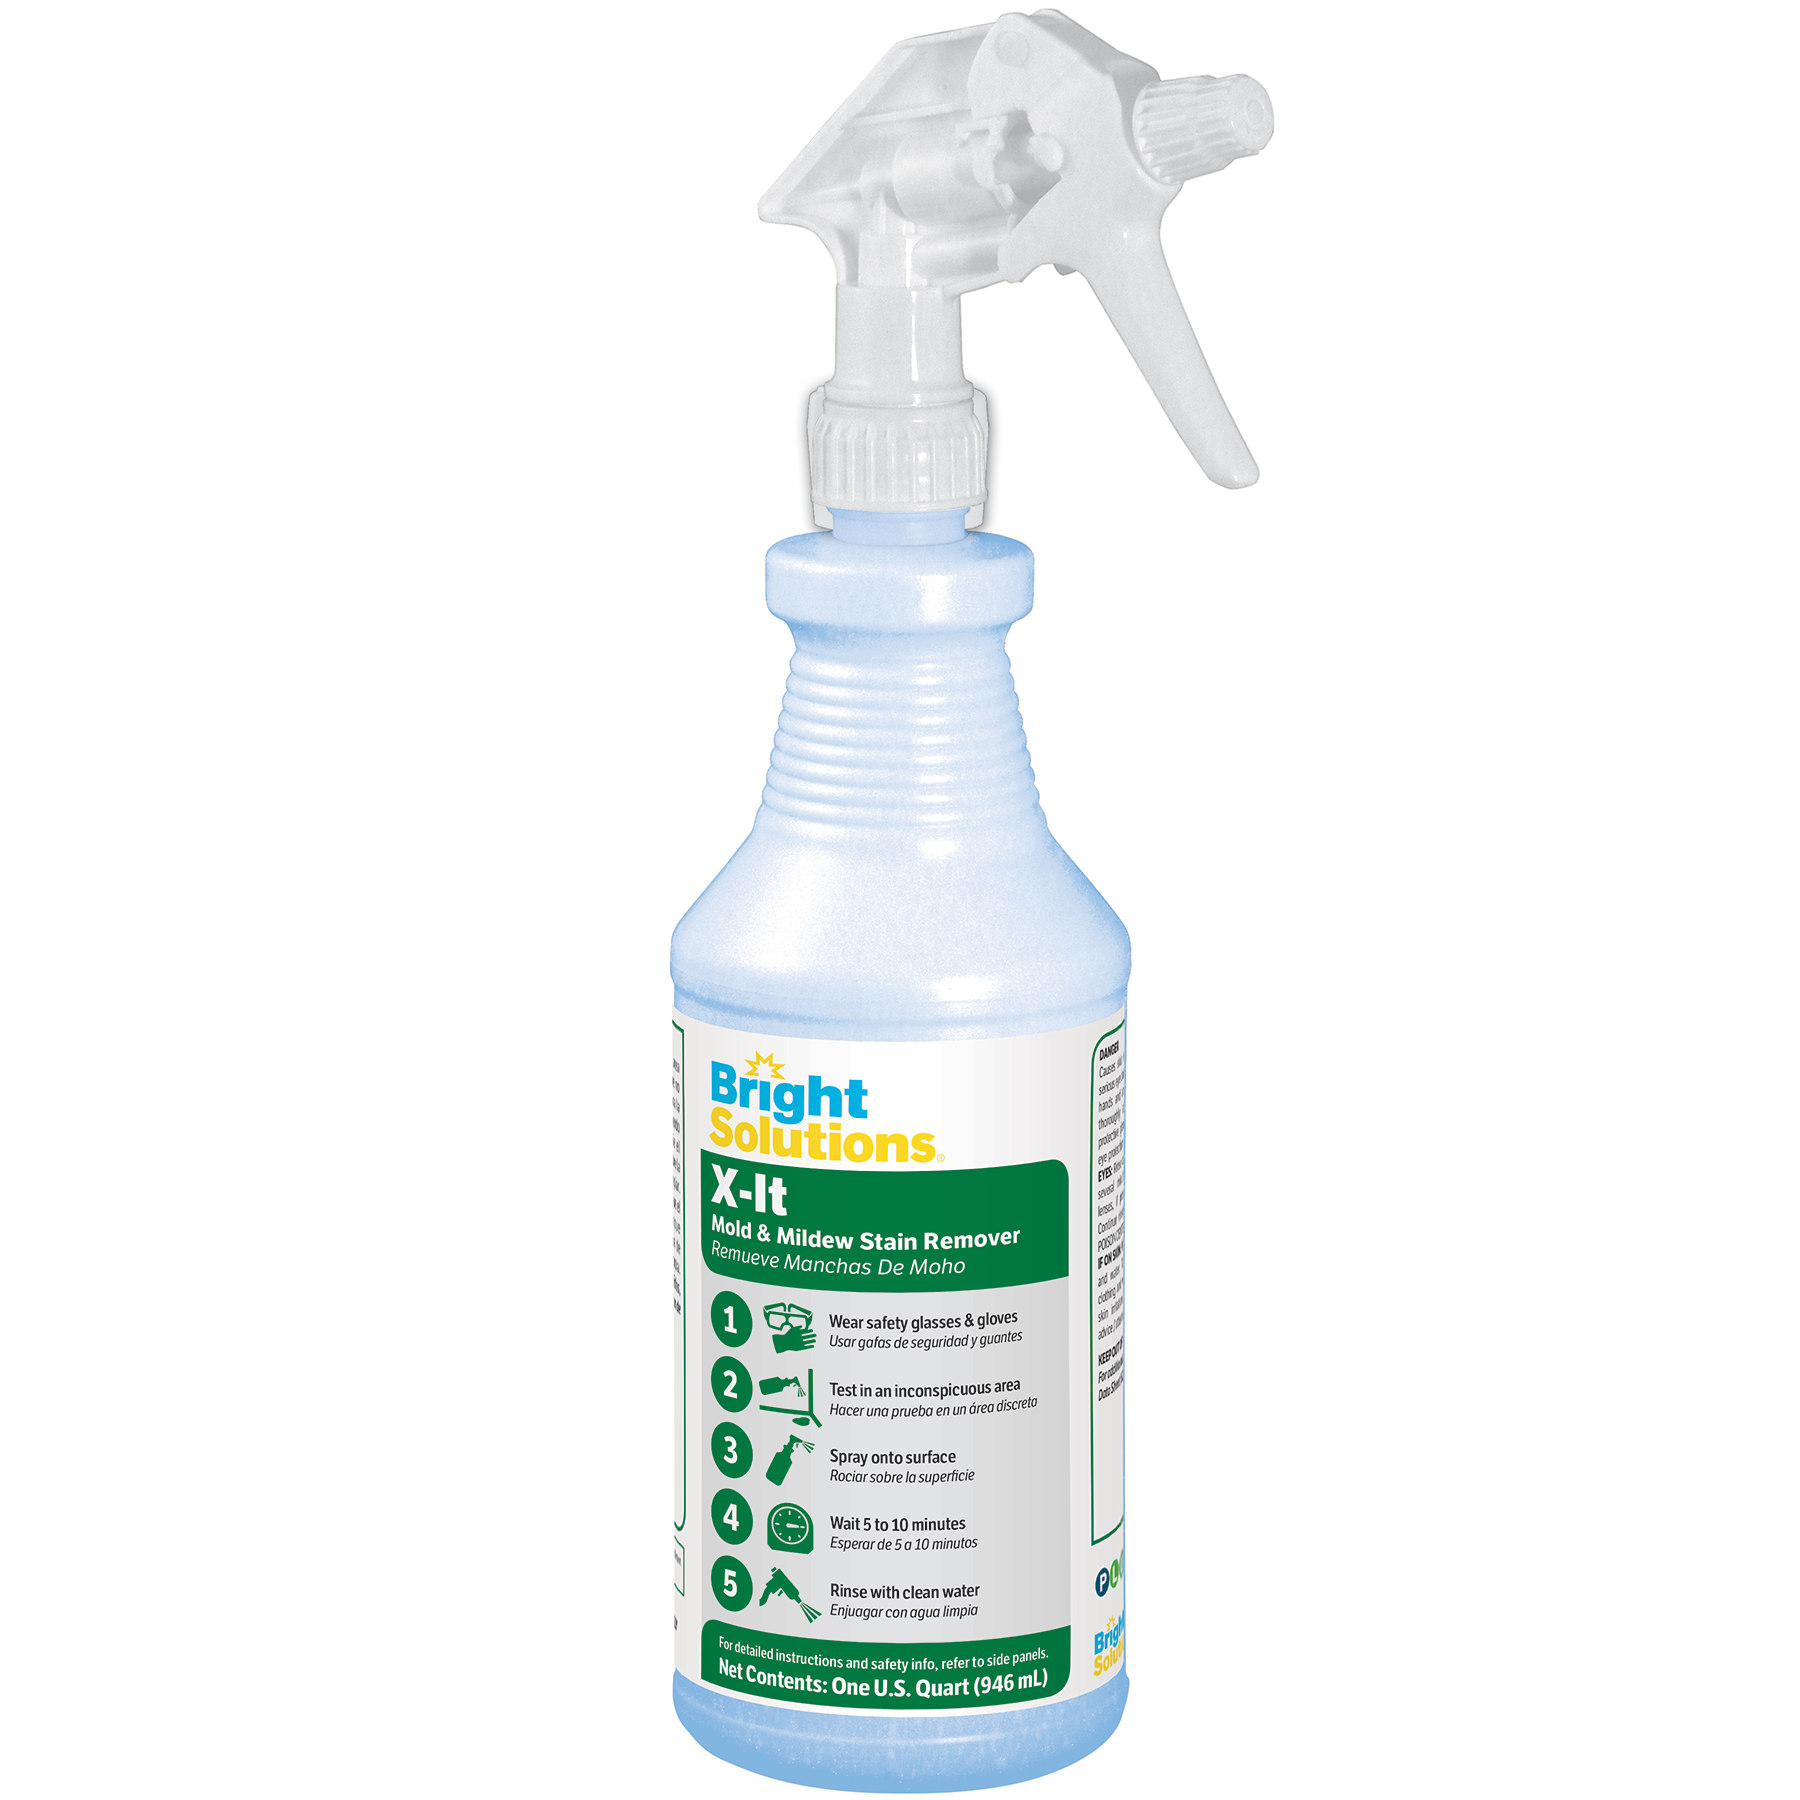 Xit Mold & Mildew Stain Remover Bright Solutions